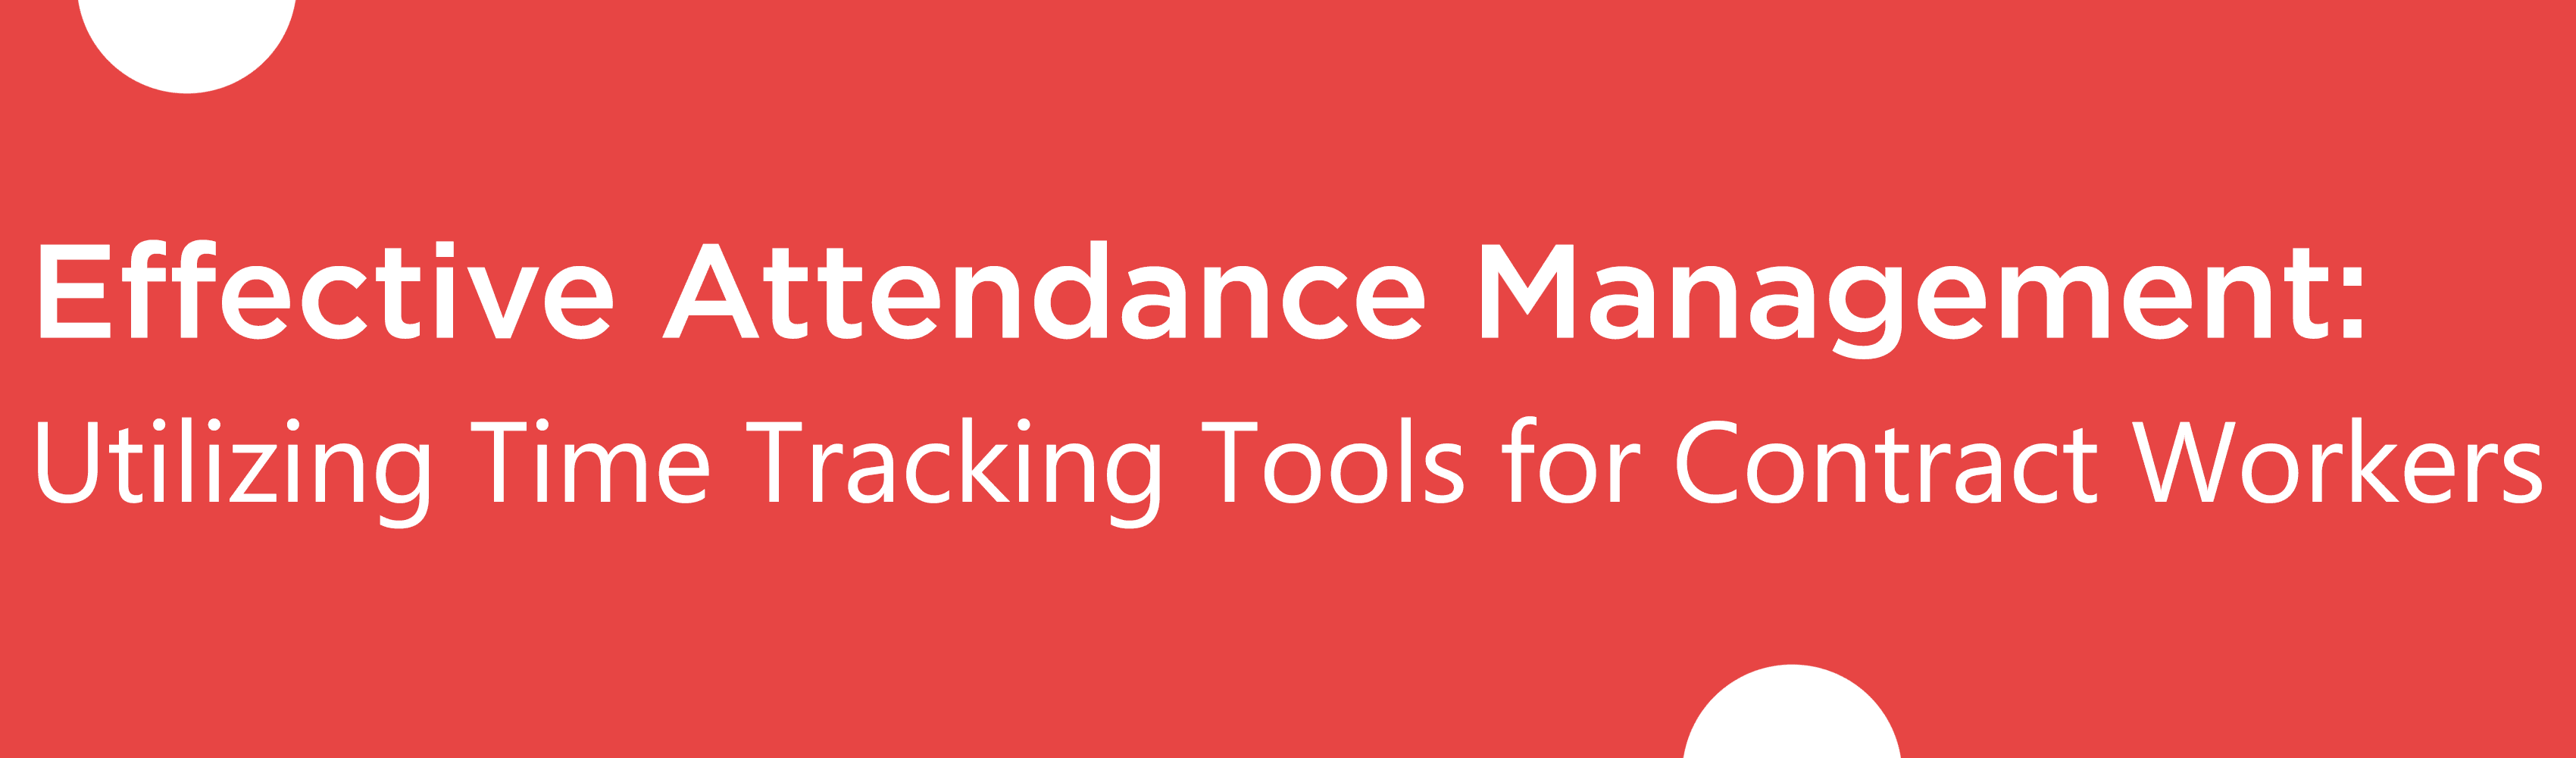 Effective Attendance Management: Utilizing Time Tracking Tools for Contract Workers